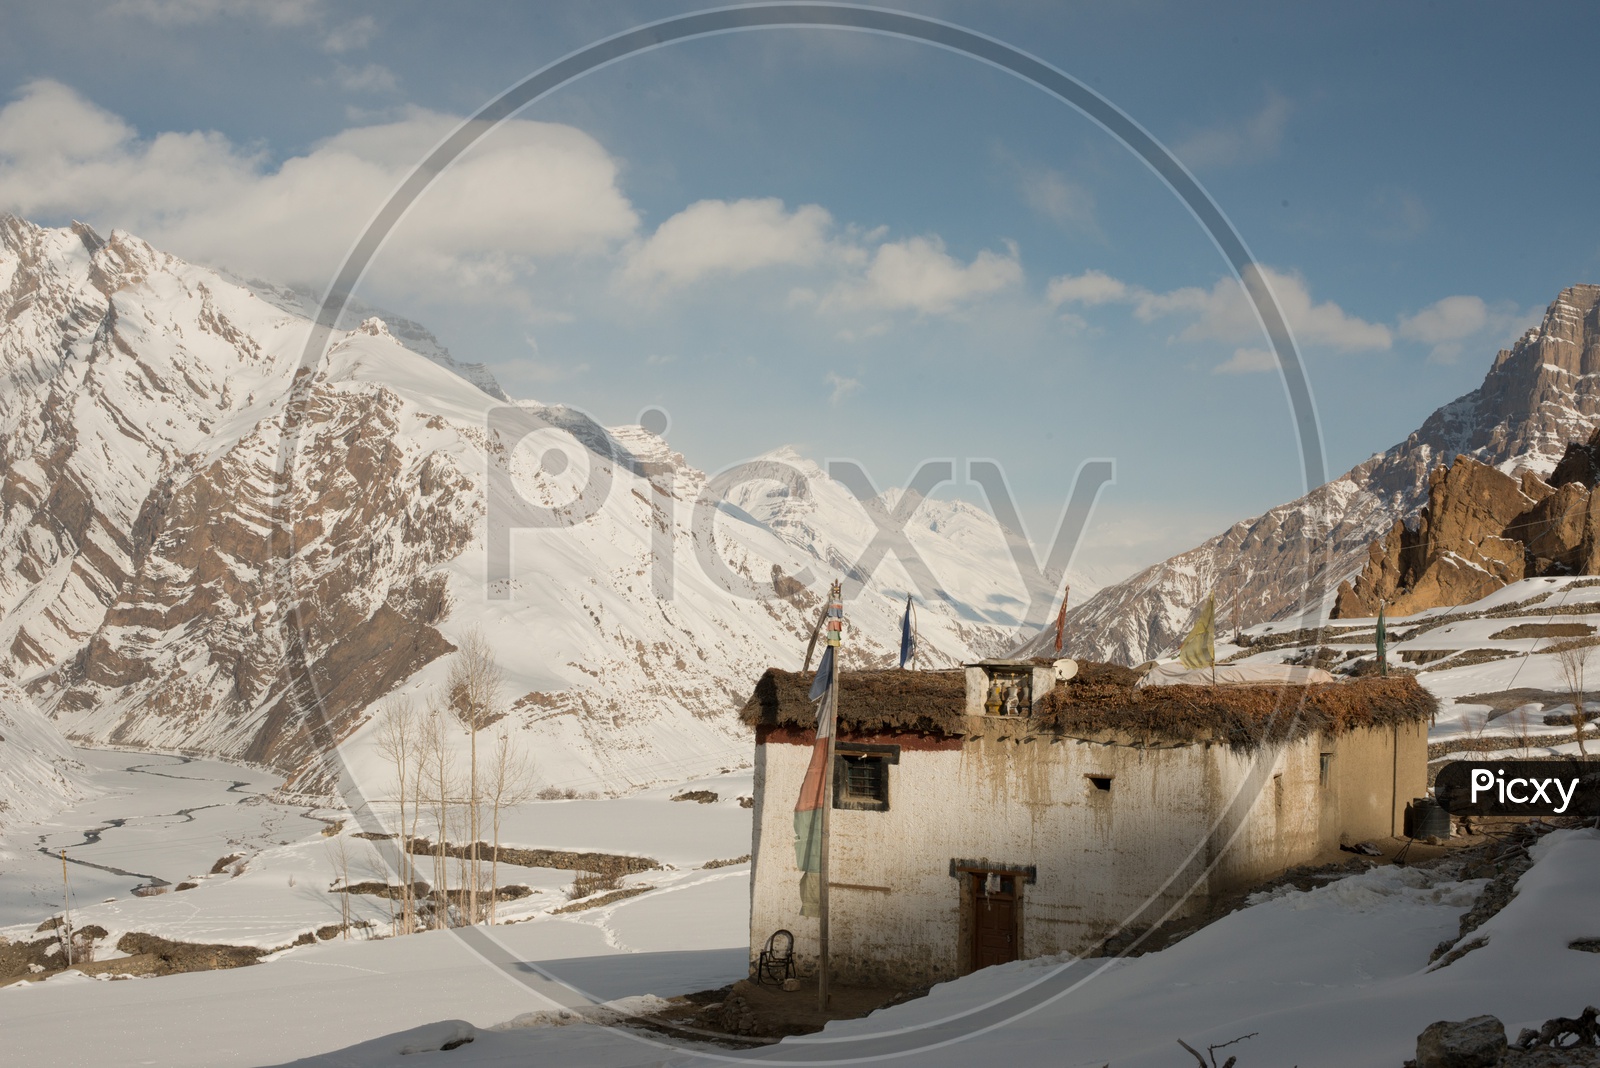 A House in Snow Surrounded by Snowy Himalayan Mountains in Winter for Trekking at Spiti Valley, Marango Rangarik